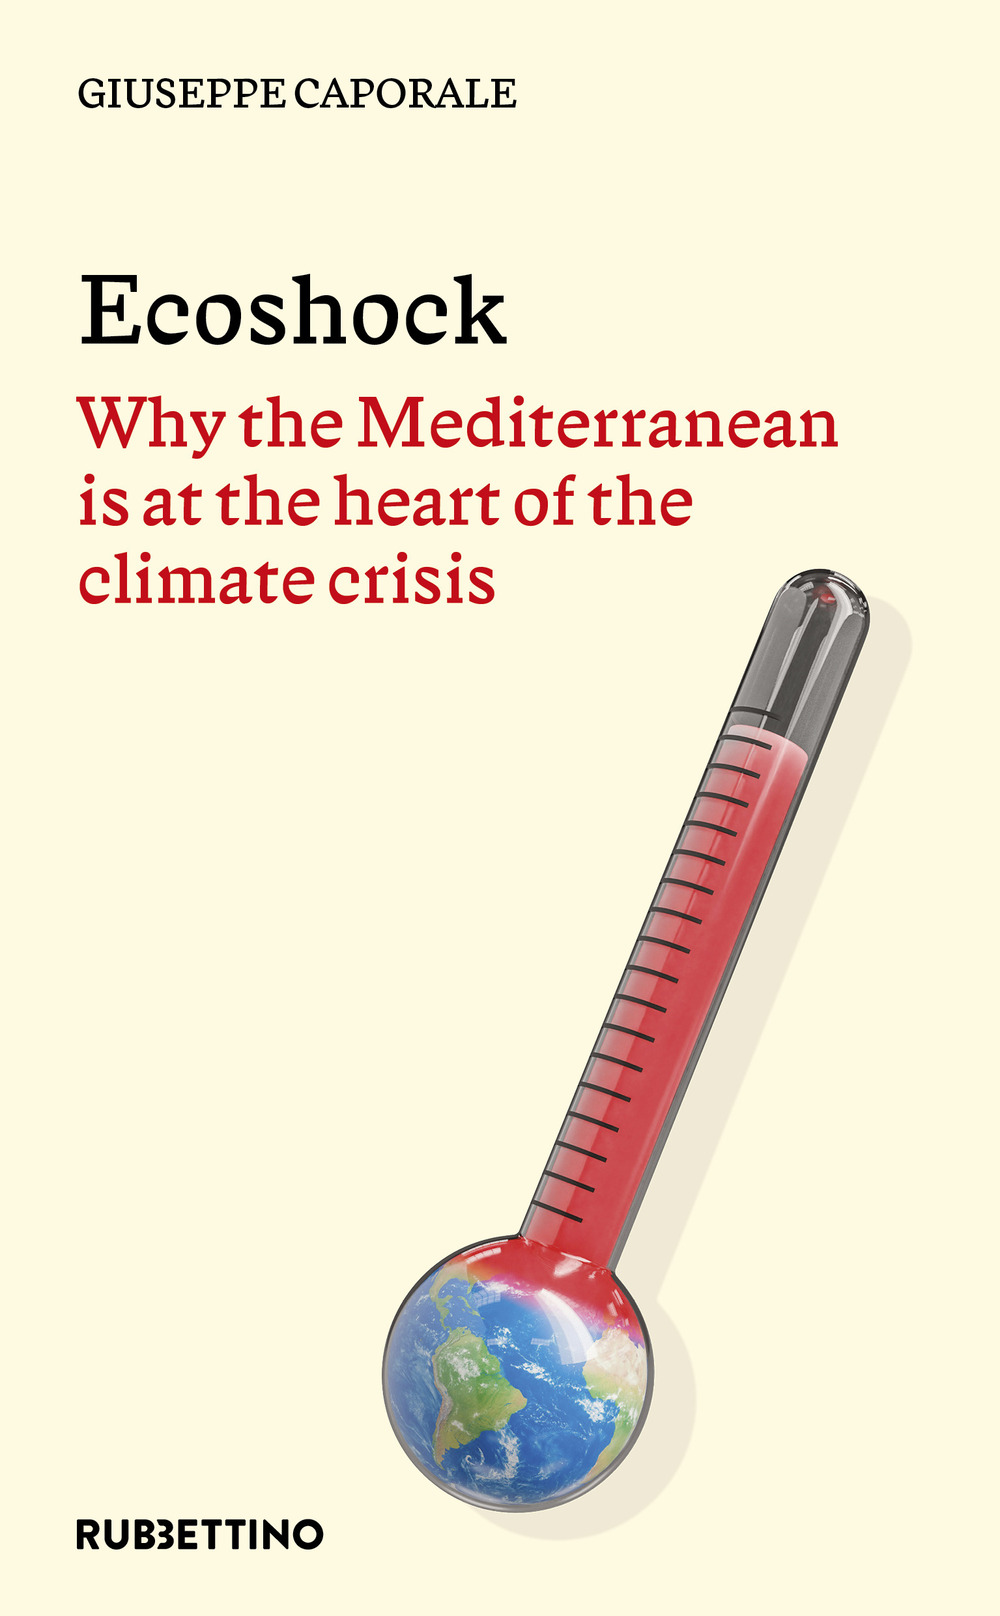 Ecoshock. Why the Mediterranean is at the heart of the climate crisis